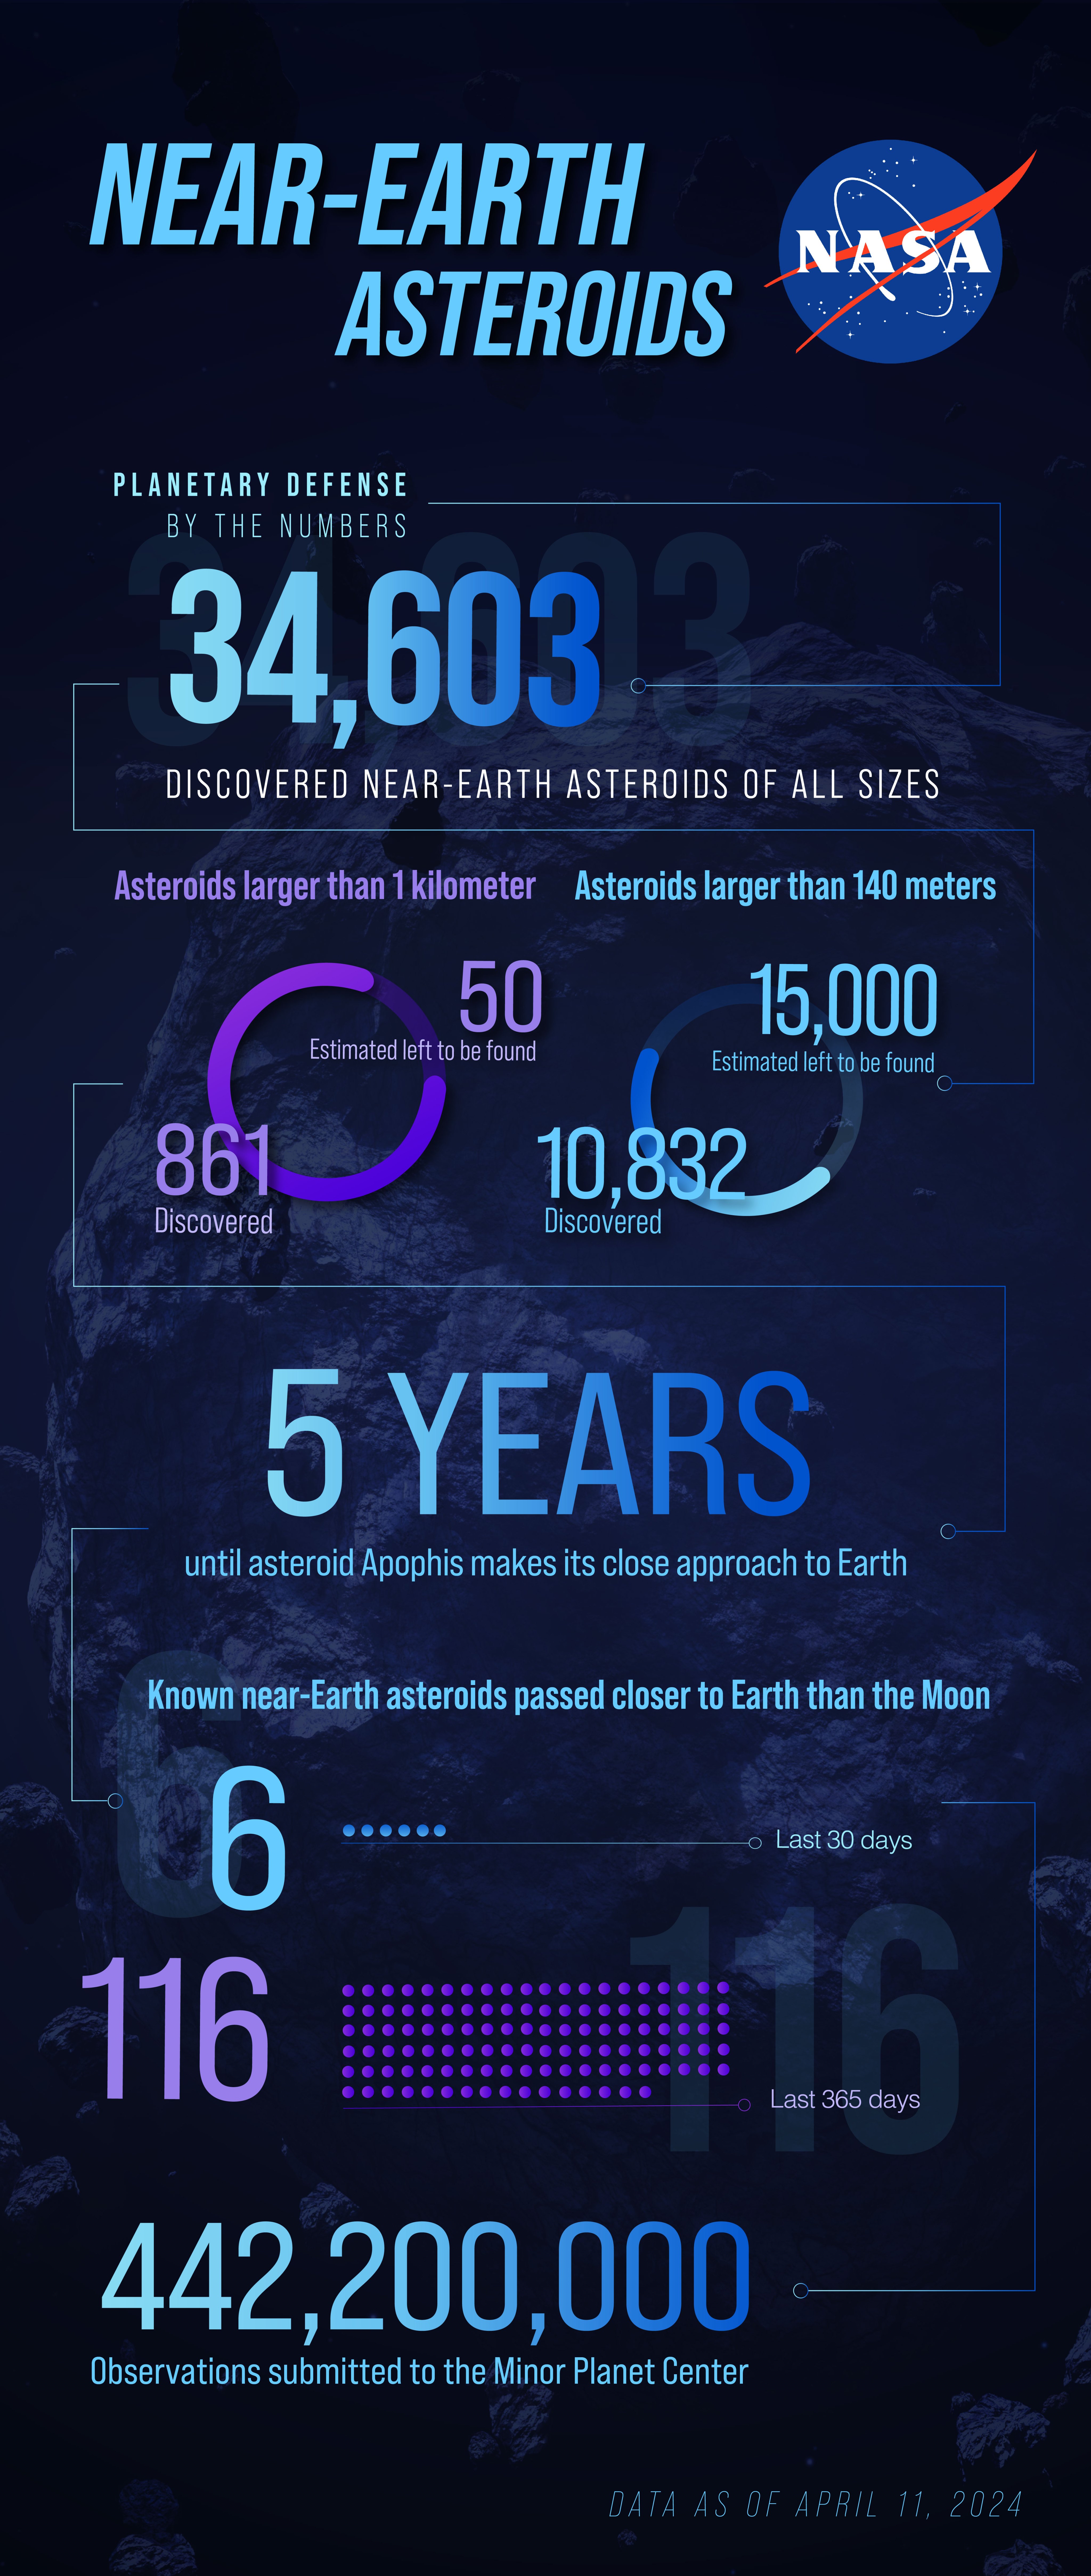 Infographic for Planetary Defense by the numbers. The title reads Near-Earth Asteroids next to the NASA logo. 34,603 discovered near-earth asteroids of all sizes. 861 discovered and 50 estimated left to be found asteroids larger than 1 km. 10,832 discovered and 15,000 estimated left to be found asteroids larger than 140 meters. Five years until asteroid Apophis makes its close approach to Earth. 6 known near-Earth asteroids passed closer to Earth than the moon in the last 30 days, 116 in the last 365 days and 442,200,000 observations submitted to the Minor Planet Center.